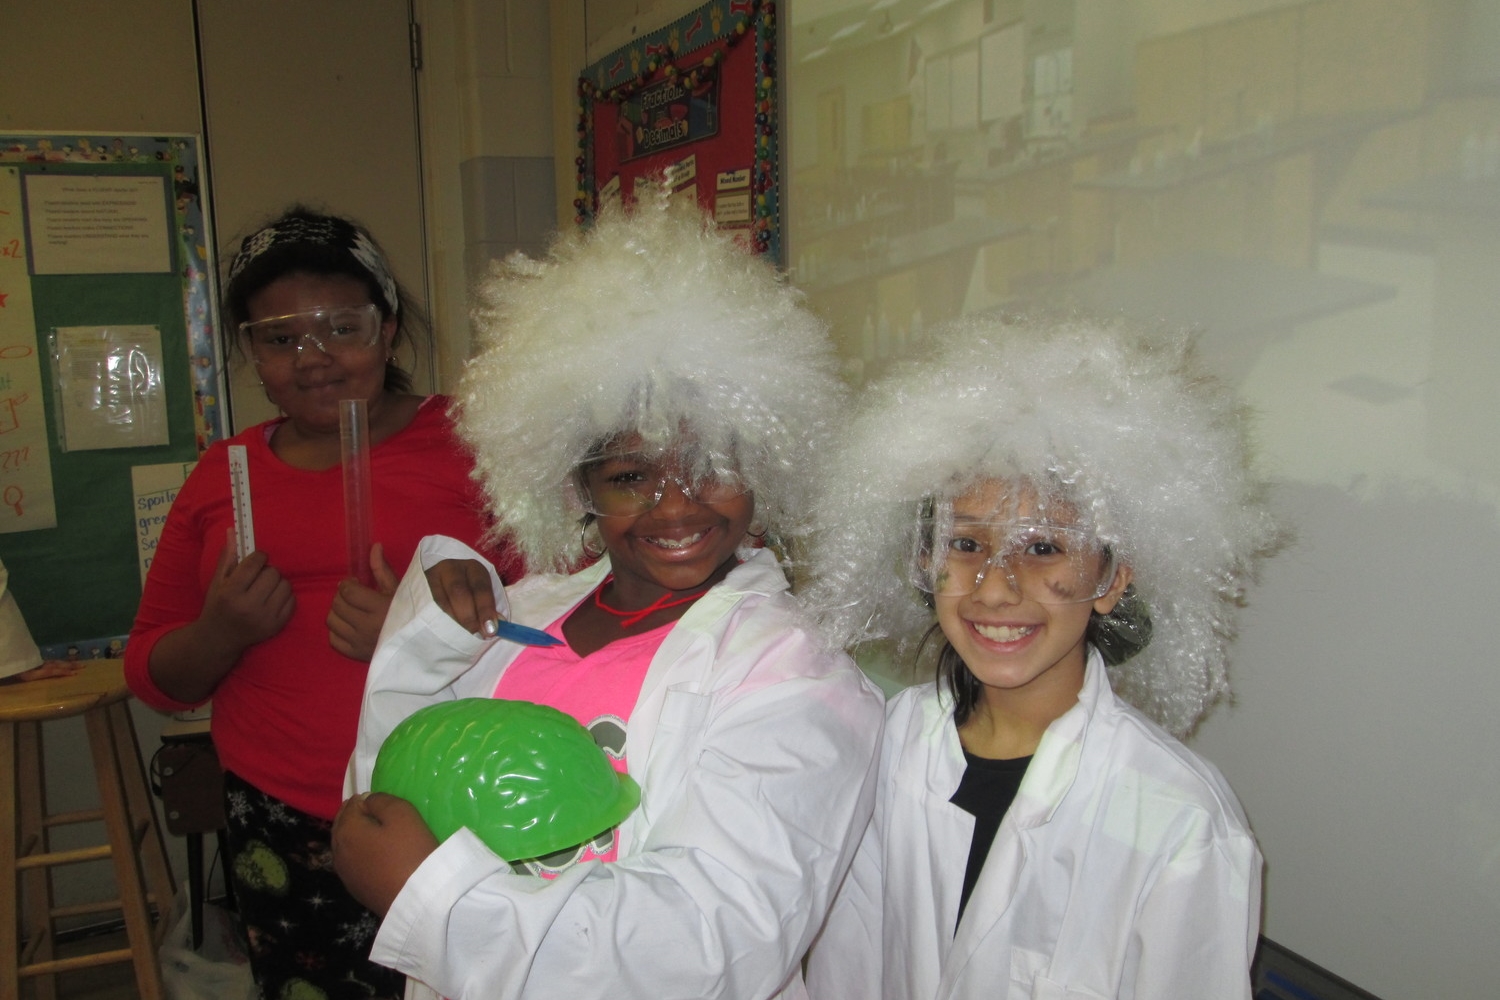 g4g Day@New York 2014 – Launch with "Trick-or-treat for Science"!